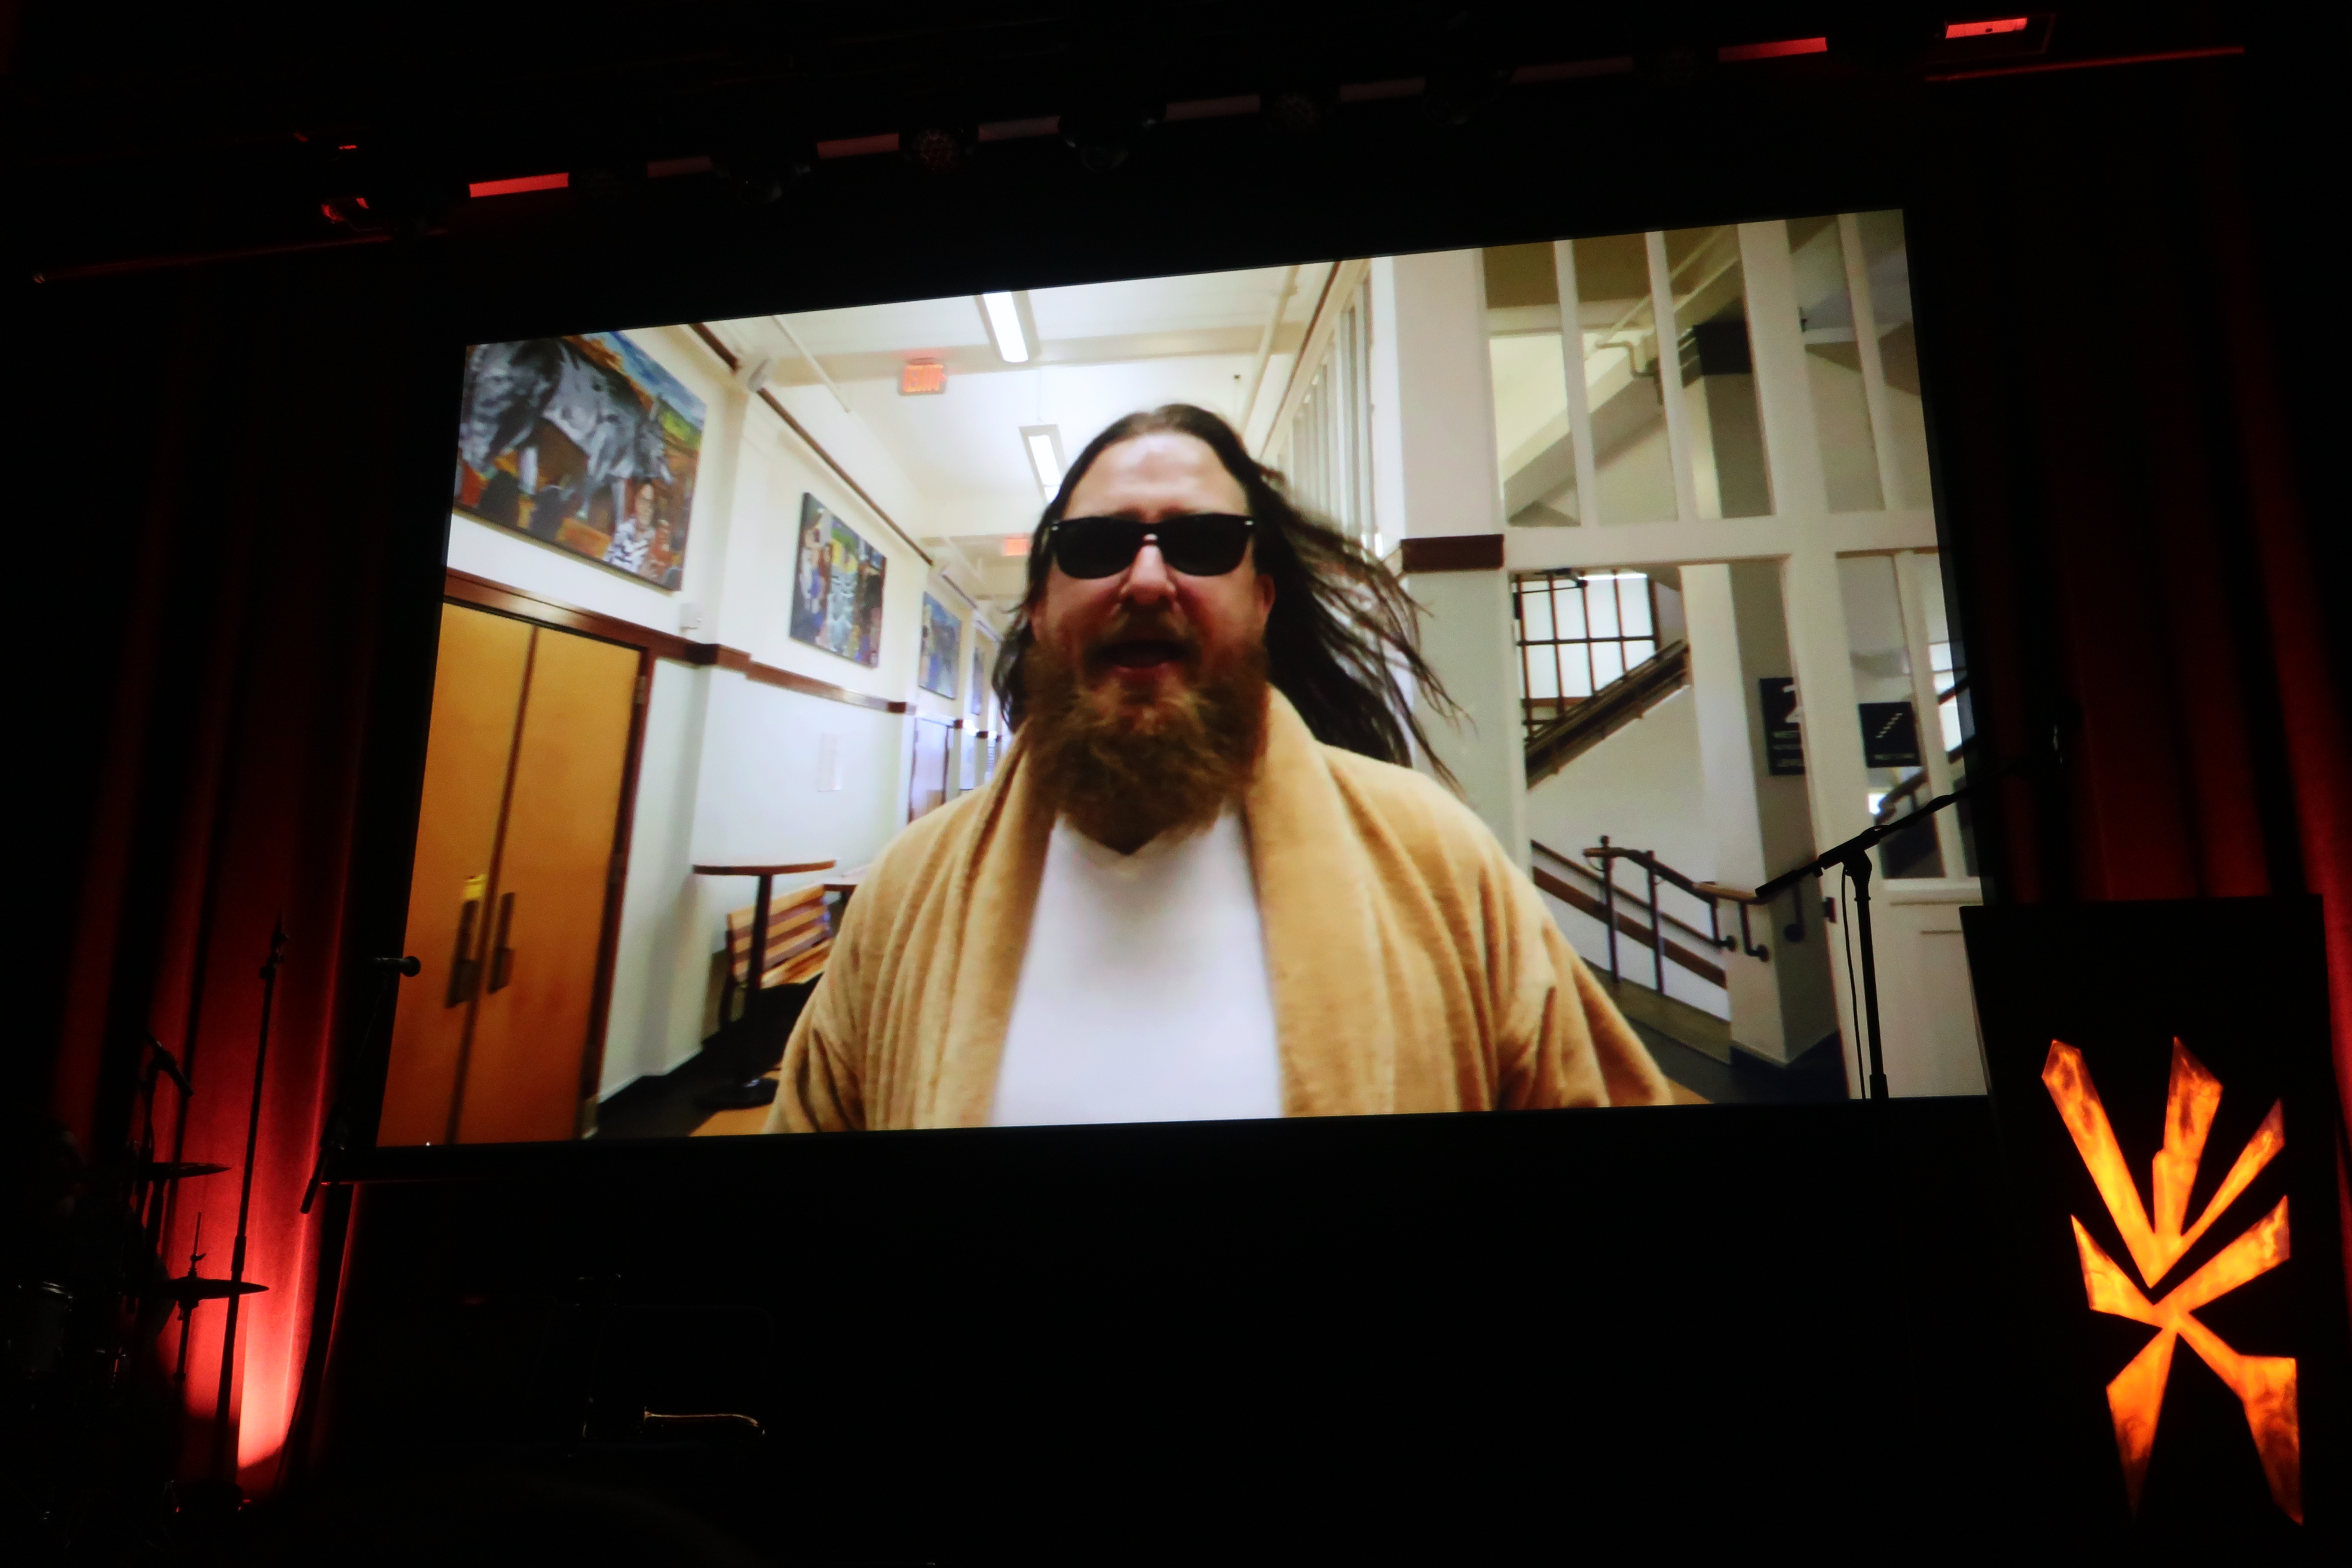 Prior to taking the stage, co-hosts Ben Love and Joe Sanders were part of a comedy video that led into the beginning of the 2019 Oregon Beer Awards Ceremony.